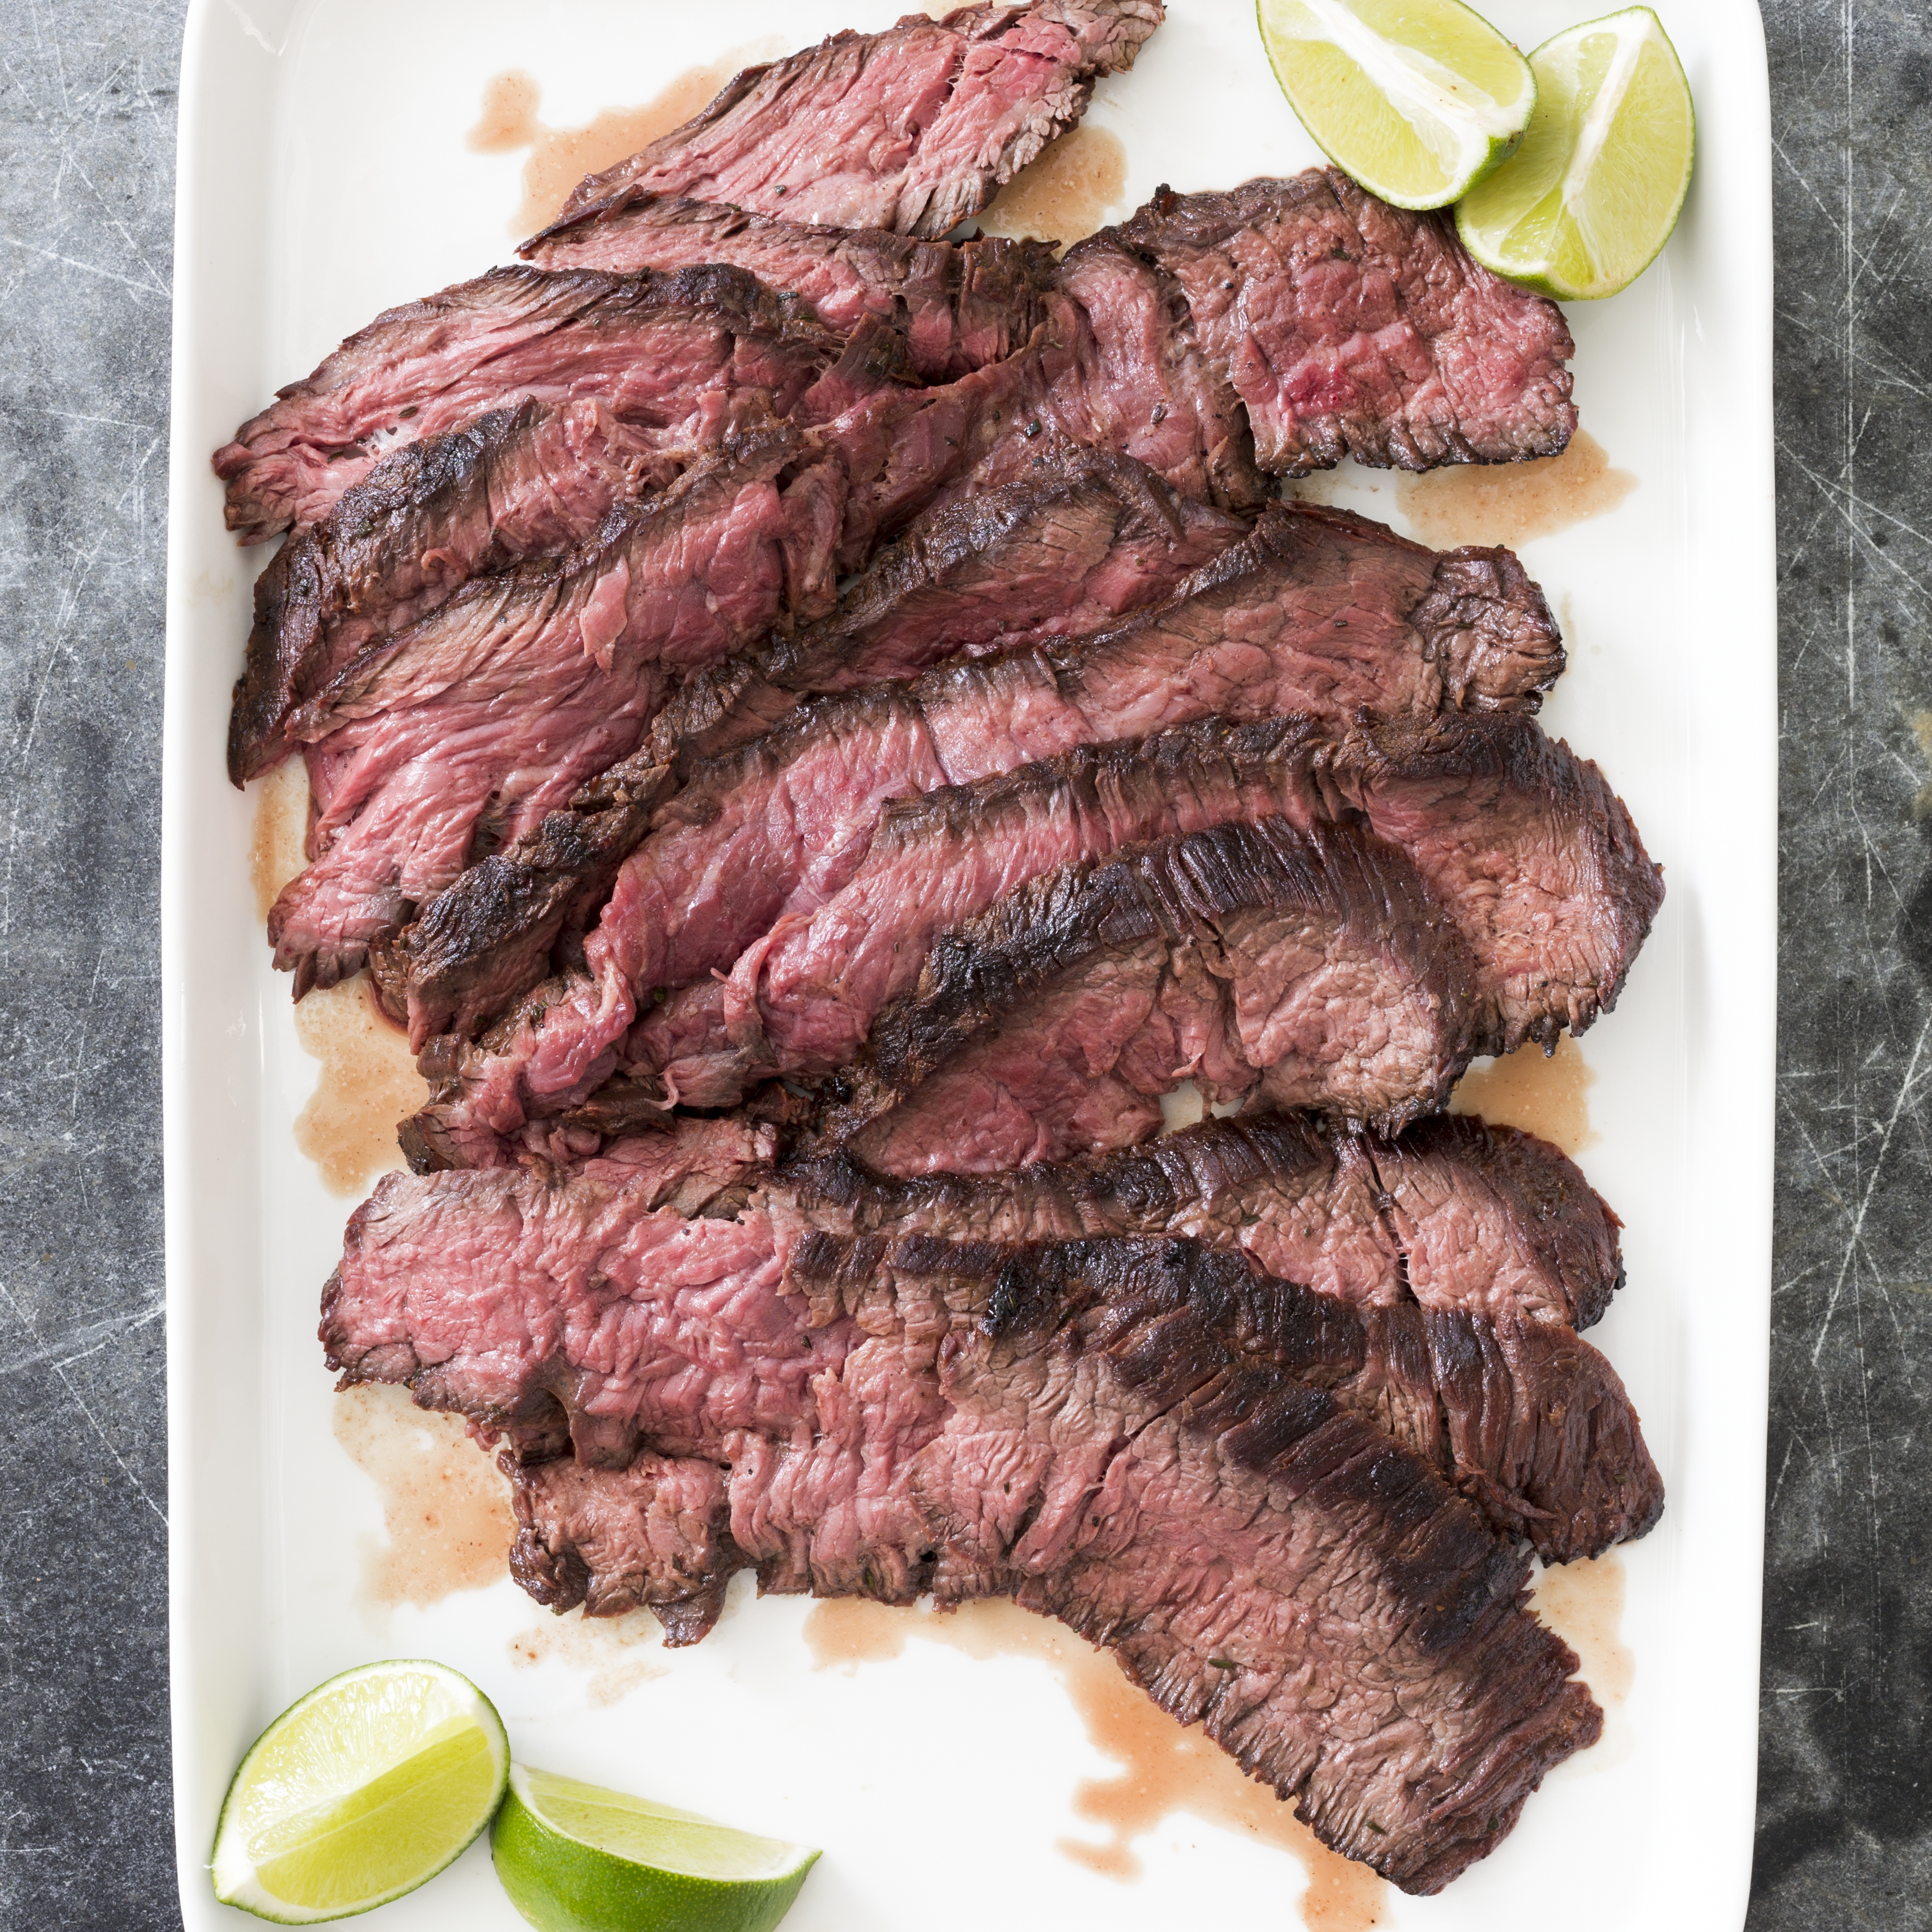 Grilling Steak Tips: Helpful Tips and Mistakes to Avoid - Steak University